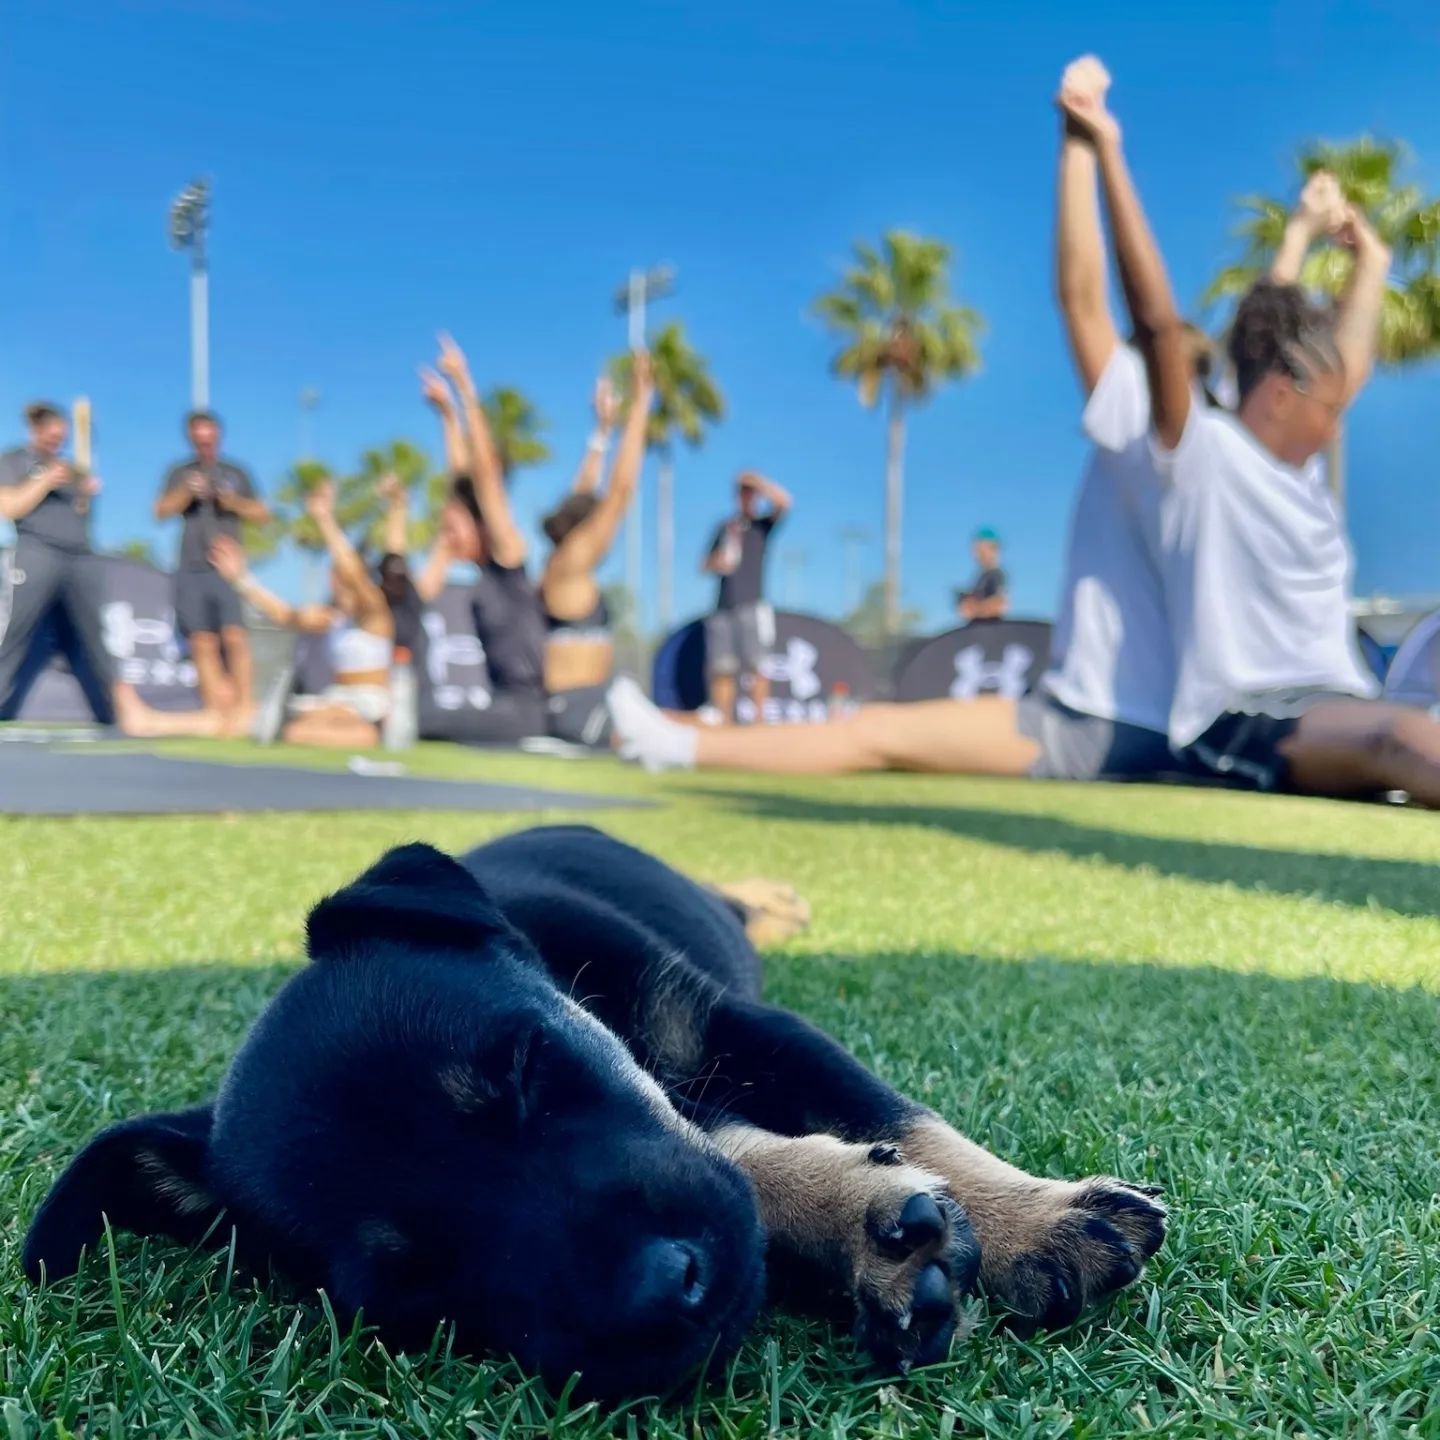 Teaching Pilates at Dawg Class with Kelsey Plum had varying degrees of intensity for the athletes. Pre court Pilates activation work aka find your powerhouse first, post court recovery core work and mindful stretching, annnnddd a fun morning session 